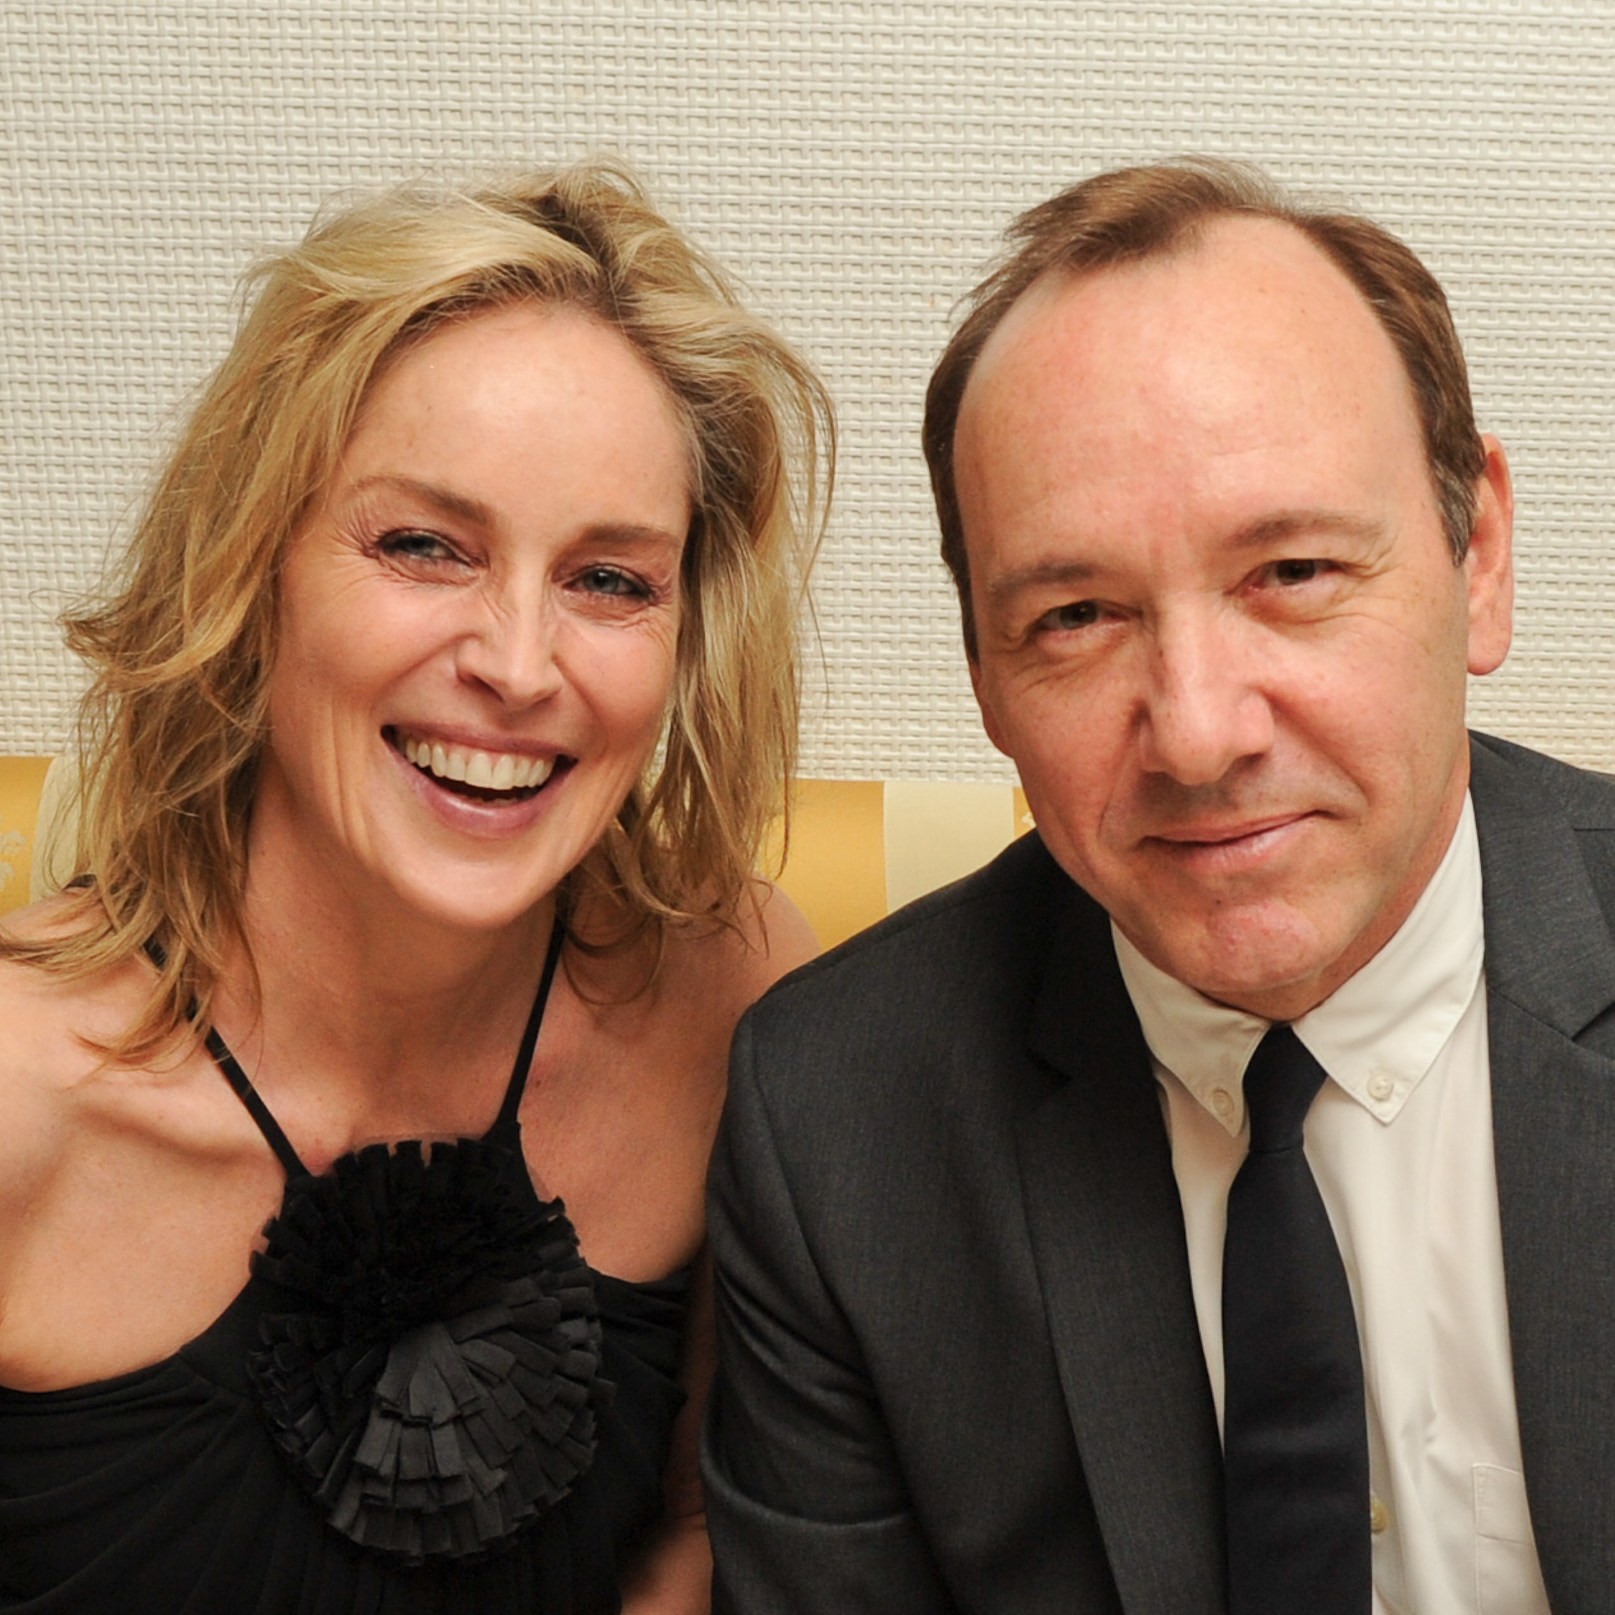 Sharon Stone on Kevin Spacey: “I can’t wait to see Kevin back at work. He is a genius”